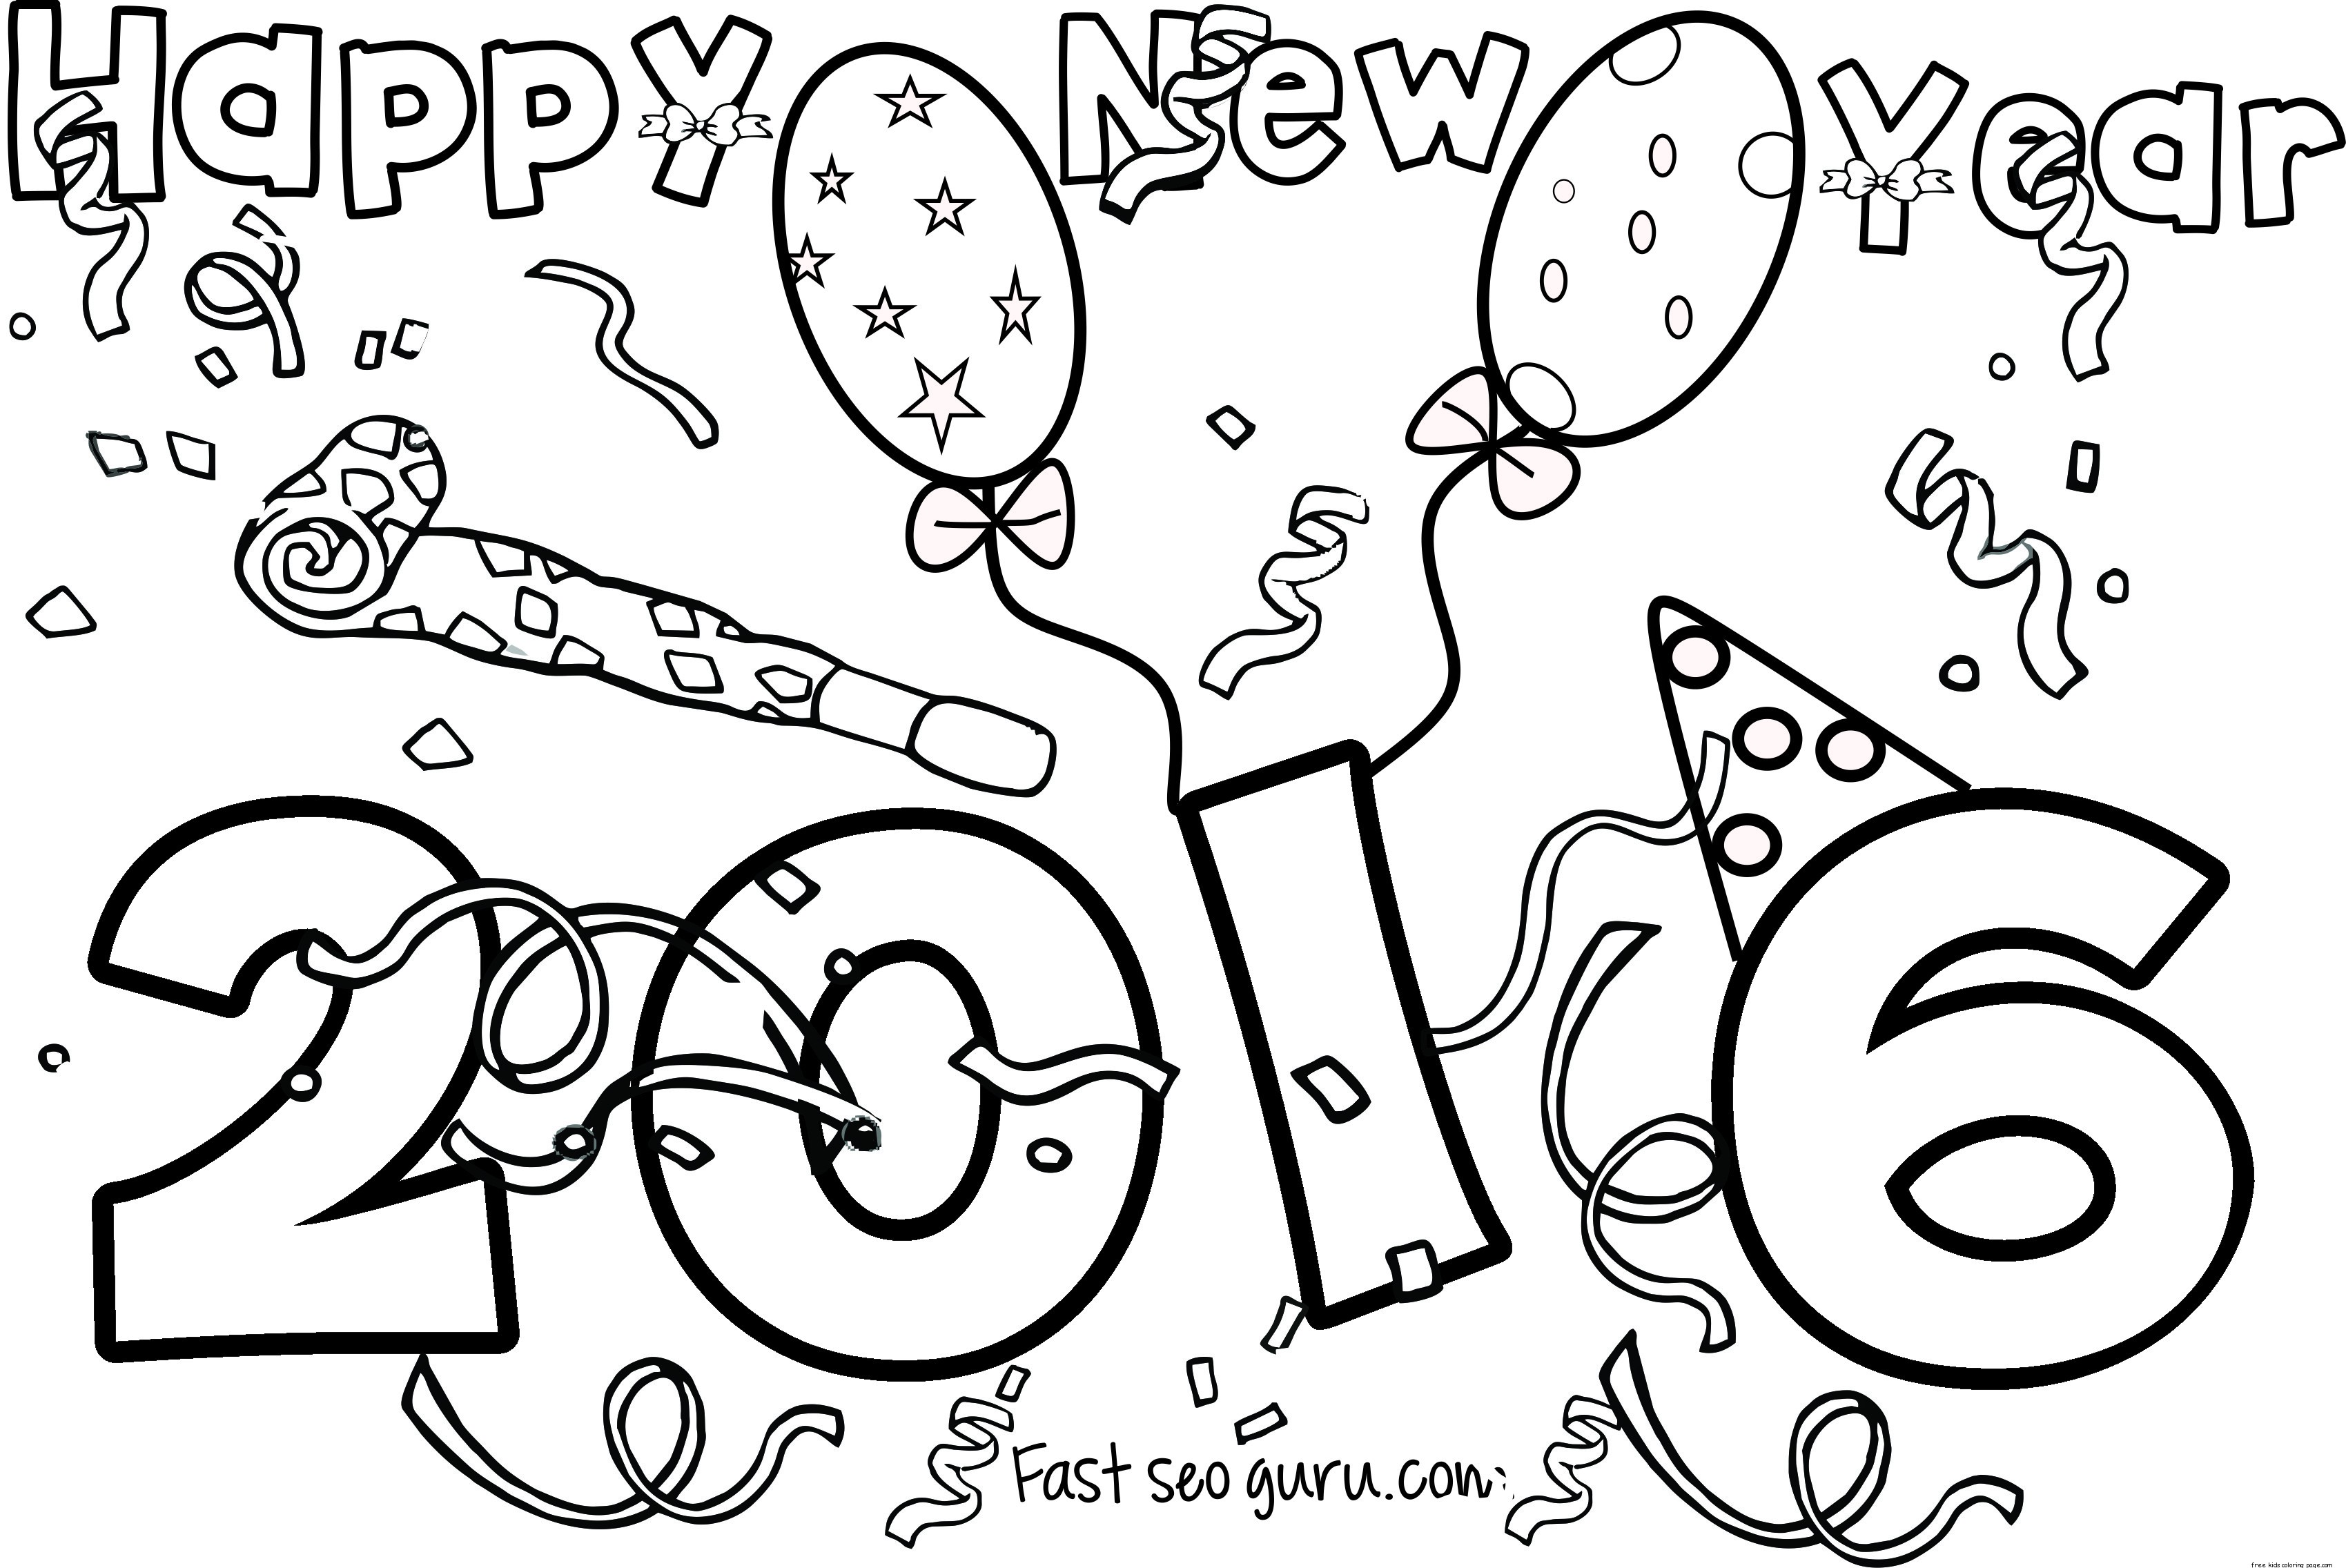 printable-new-year-coloring-pages-at-getcolorings-free-printable